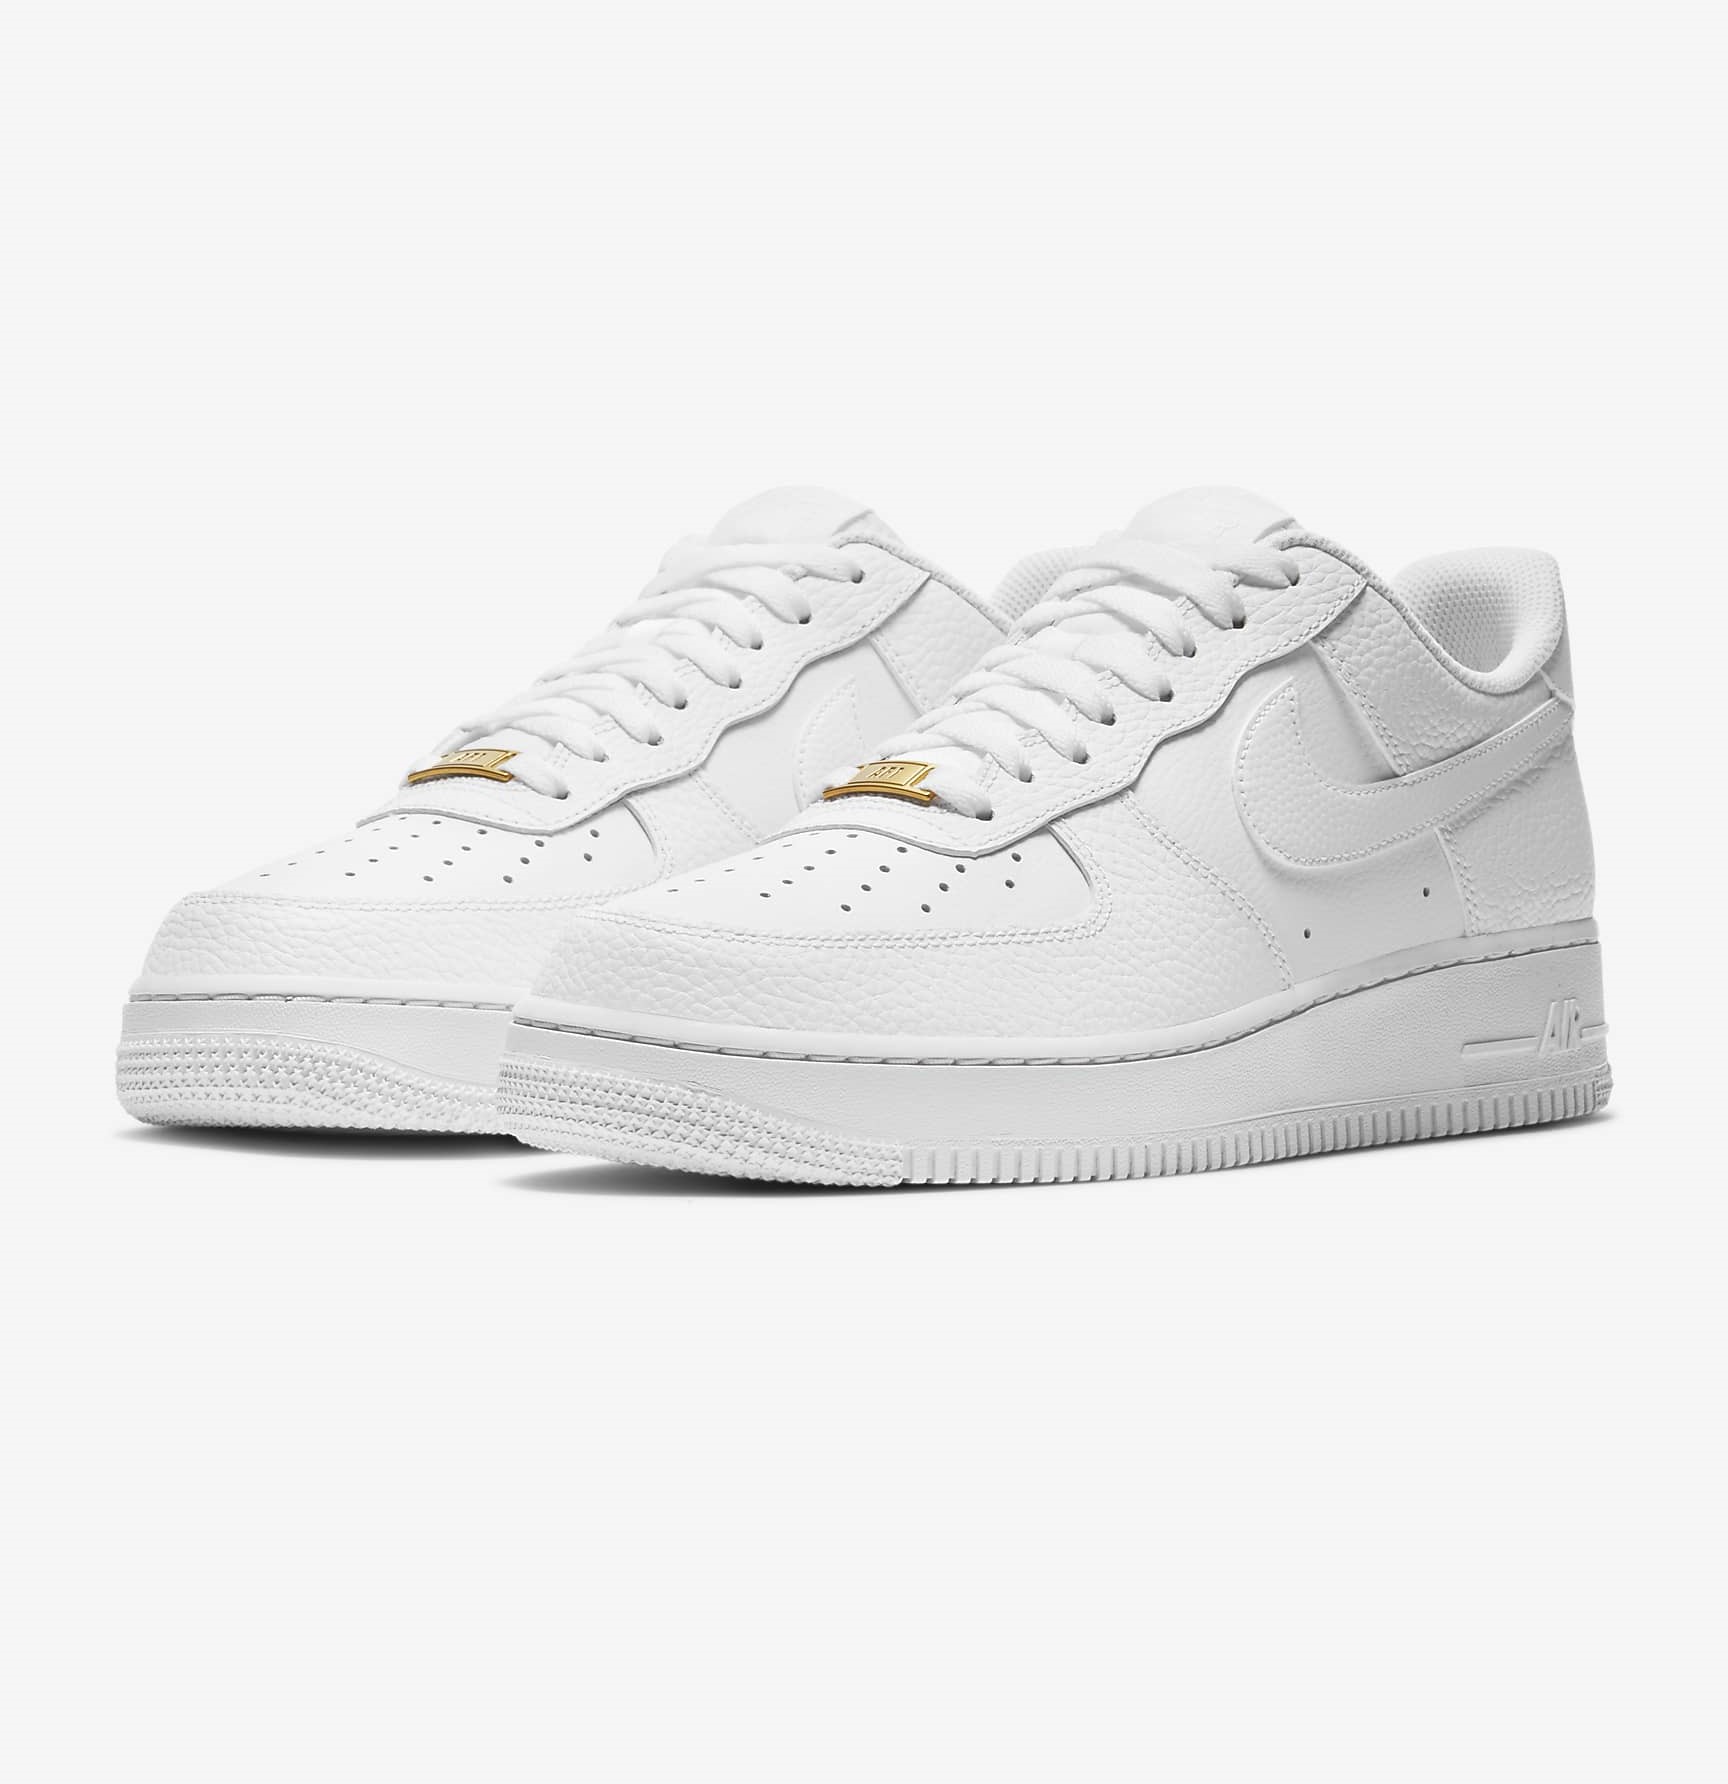 Nike plain white air force 1 Gives All-White Air Force 1 Low An Elegant Upgrade - Maxim